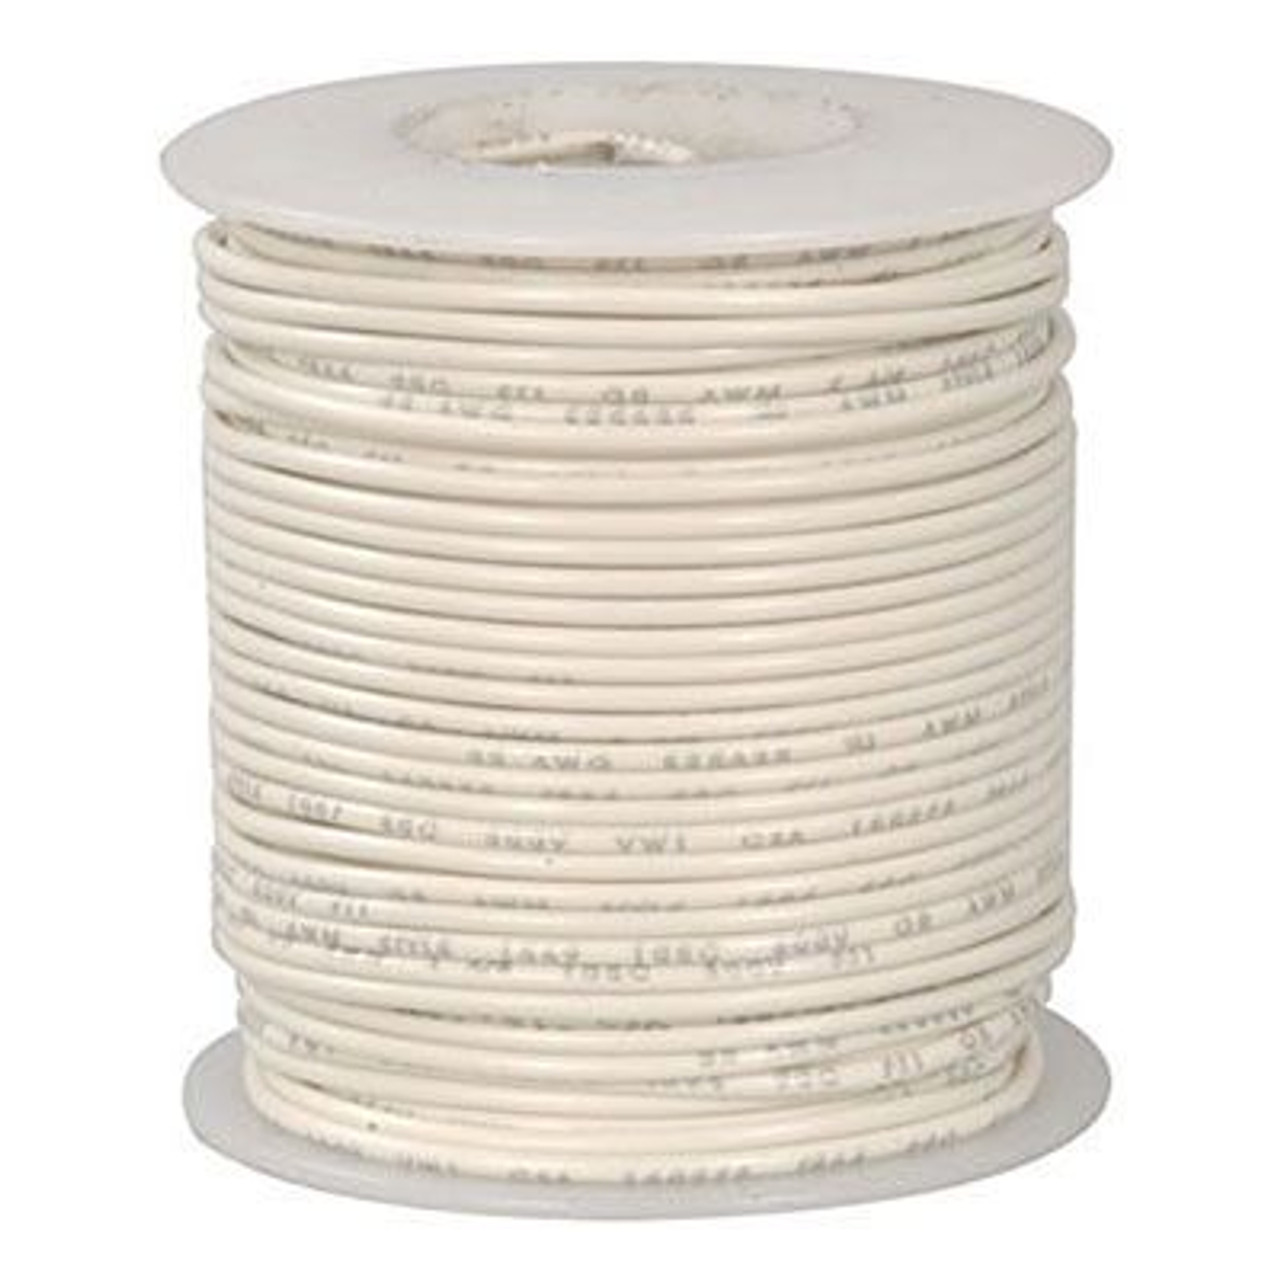 White 25 Foot 14 AWG stranded hook-up wire